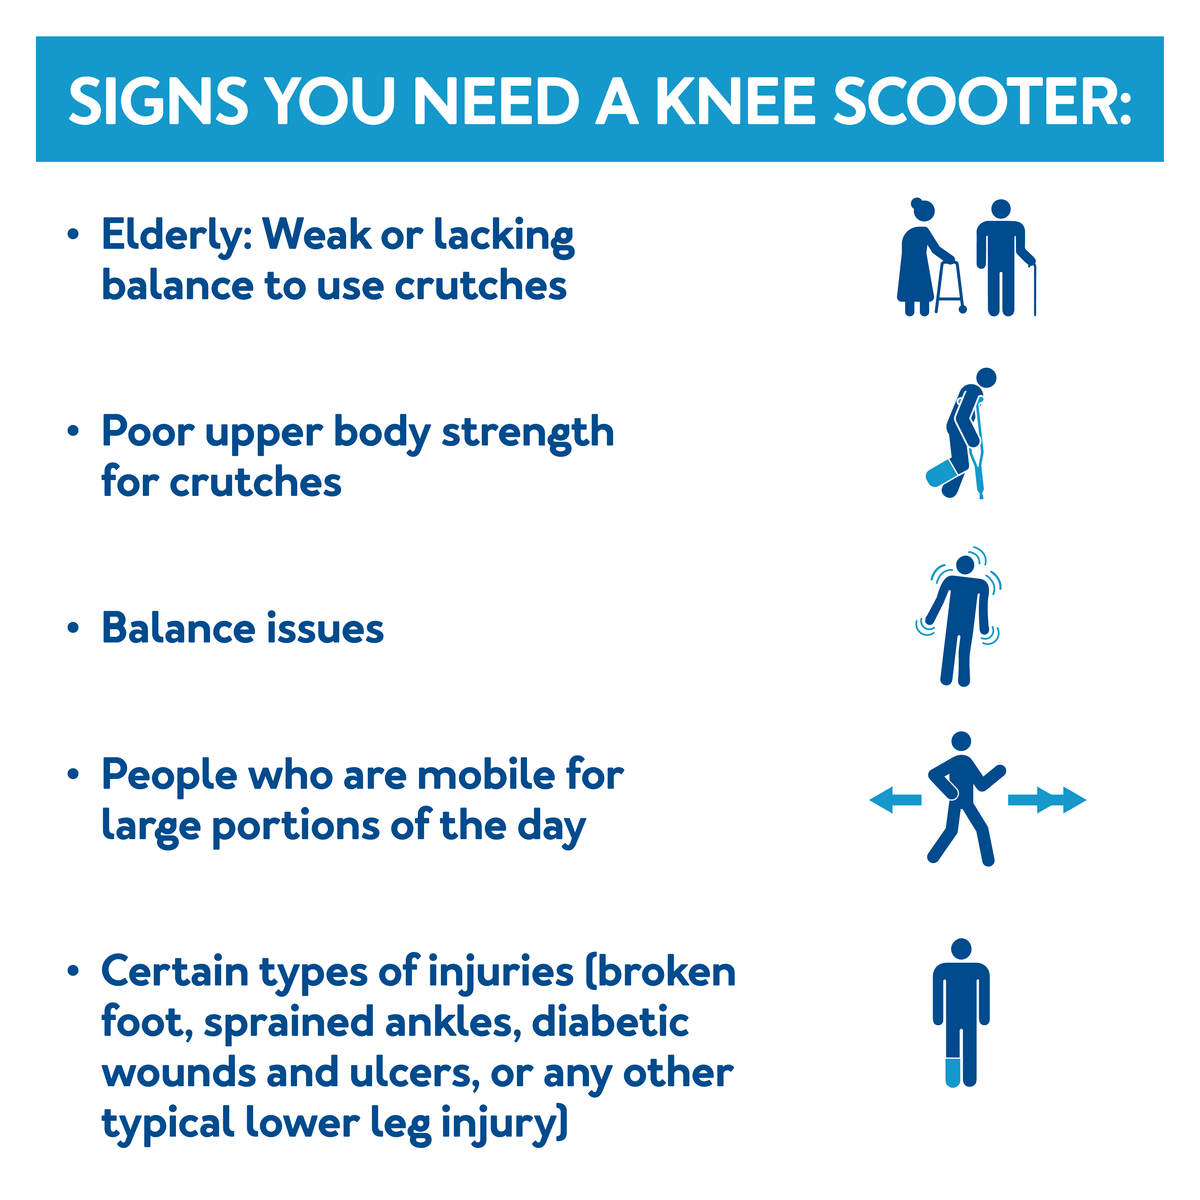 Signs you need a knee scooter, further details are provided below.